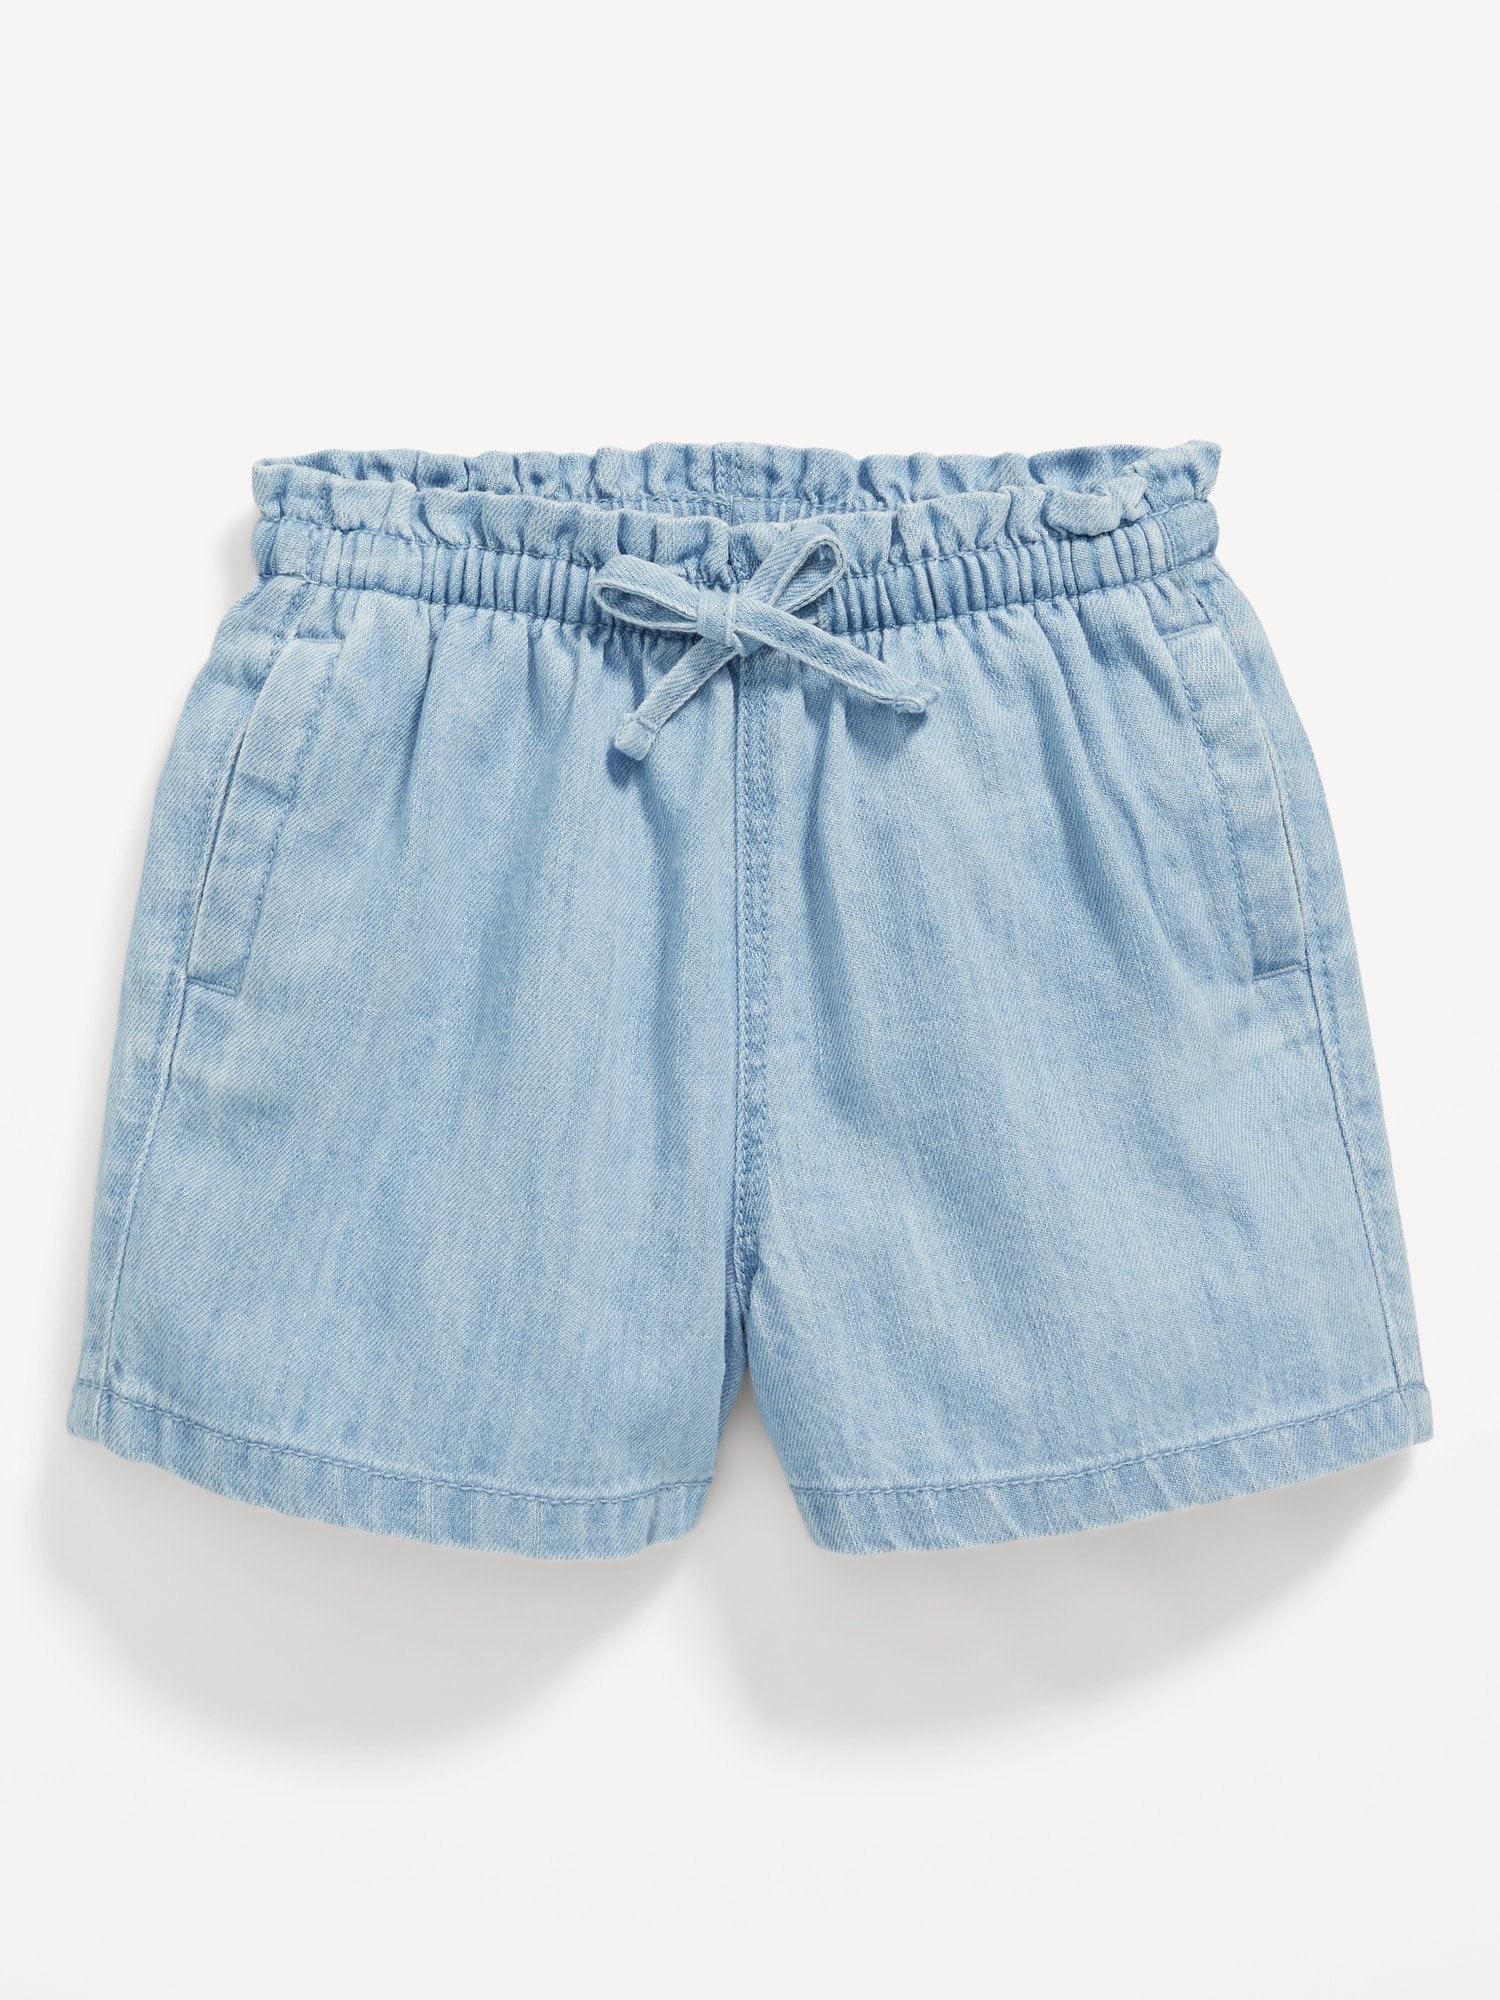 Ruffled Chambray Pull-On Shorts for Toddler Girls Hot Deal